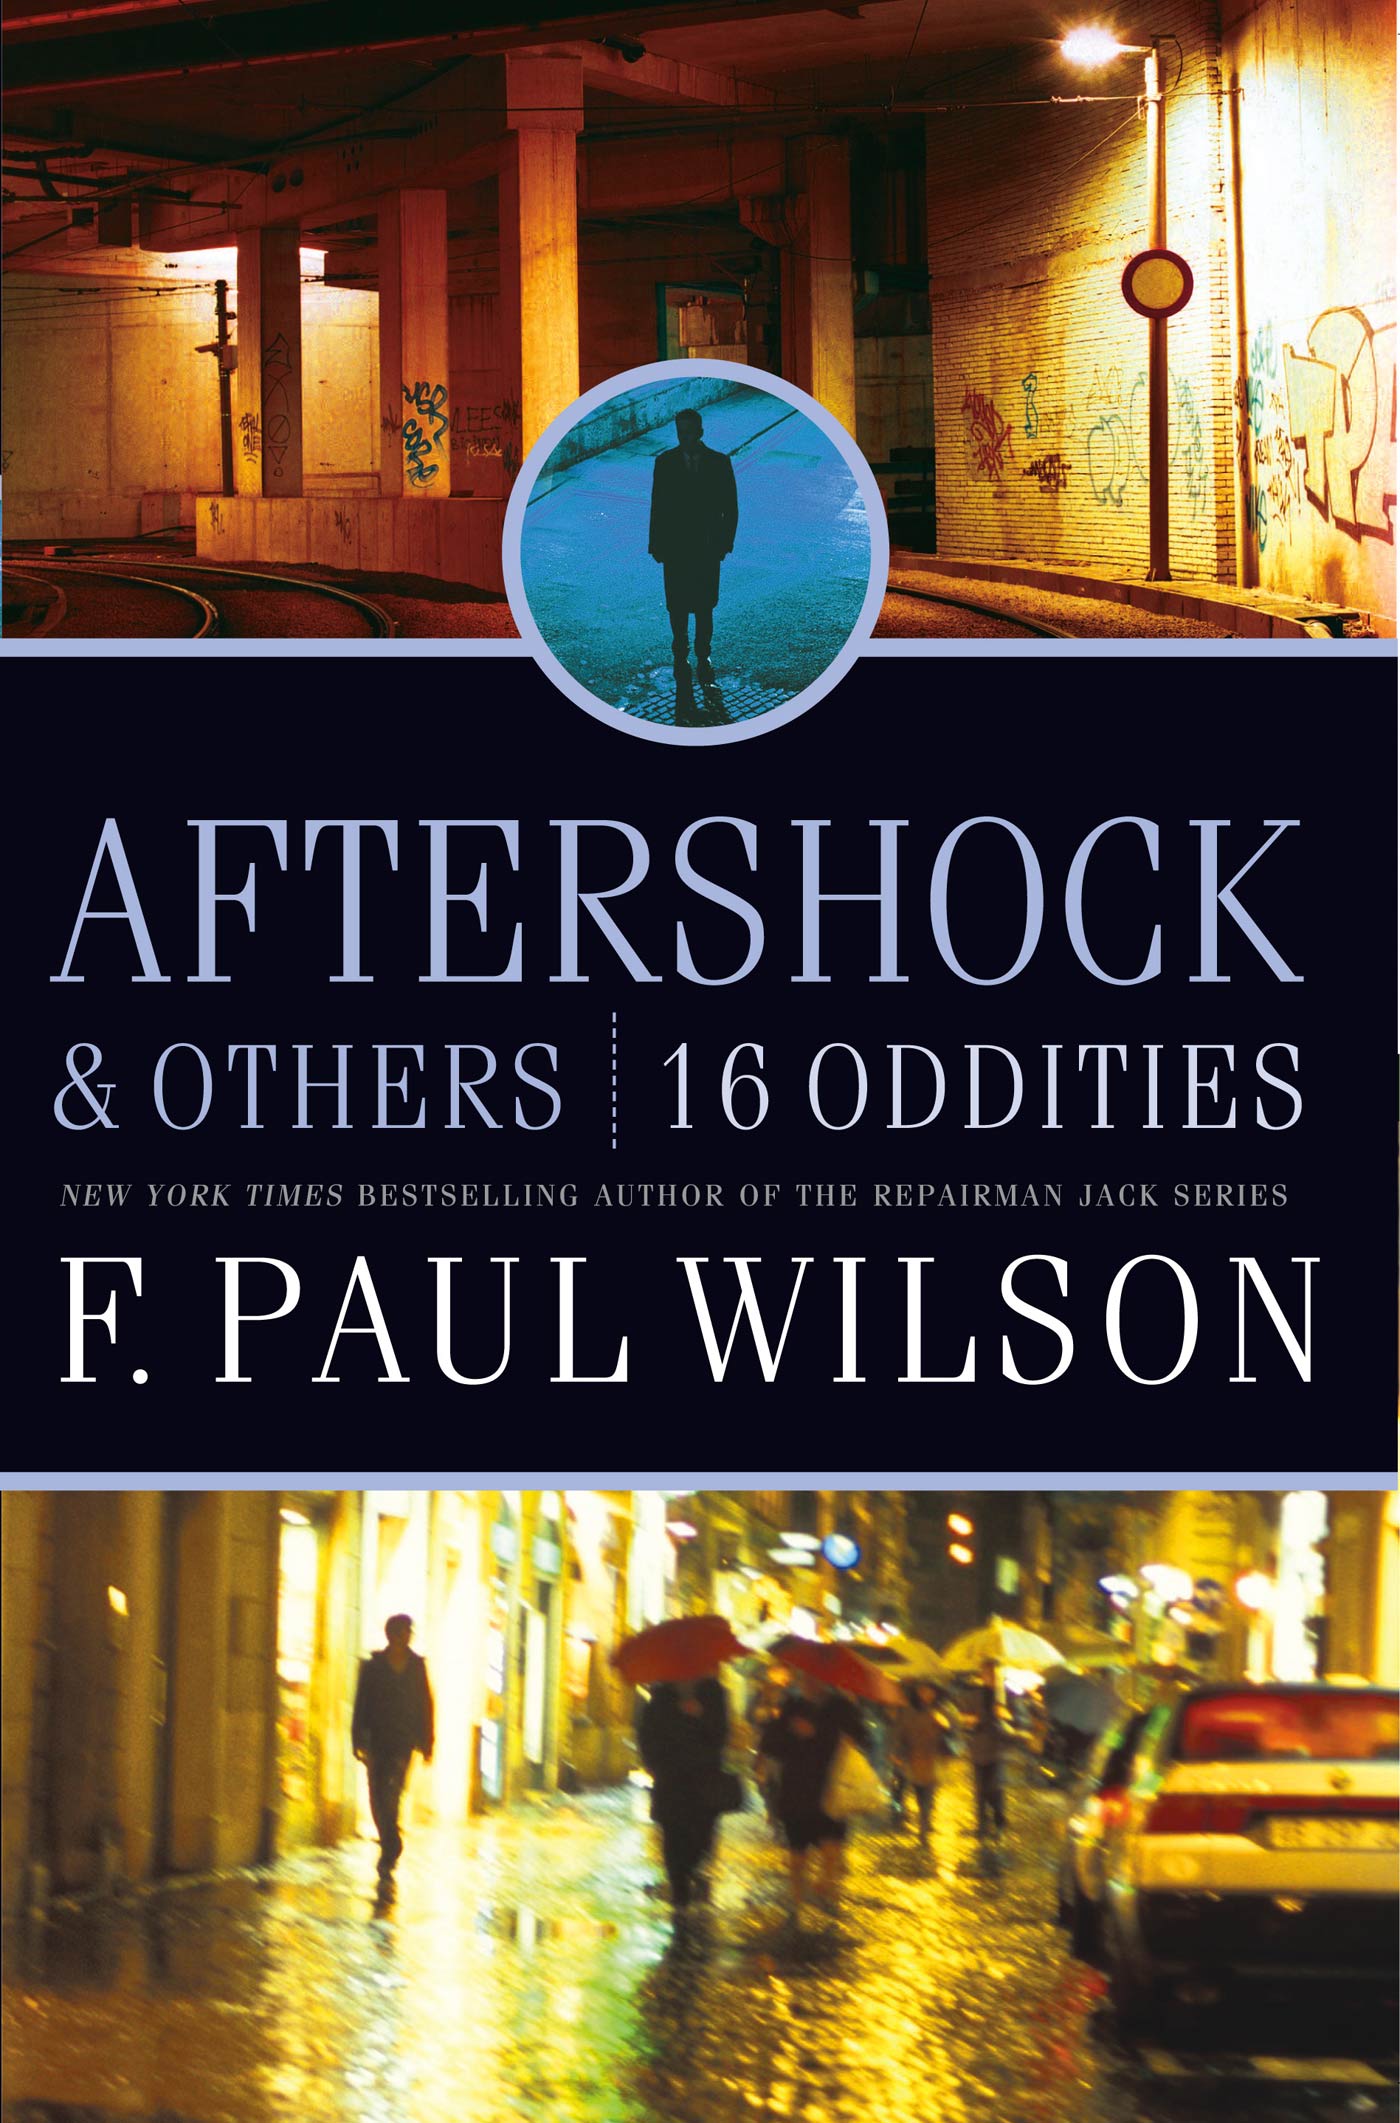 Aftershock & Others : 16 Oddities by F. Paul Wilson